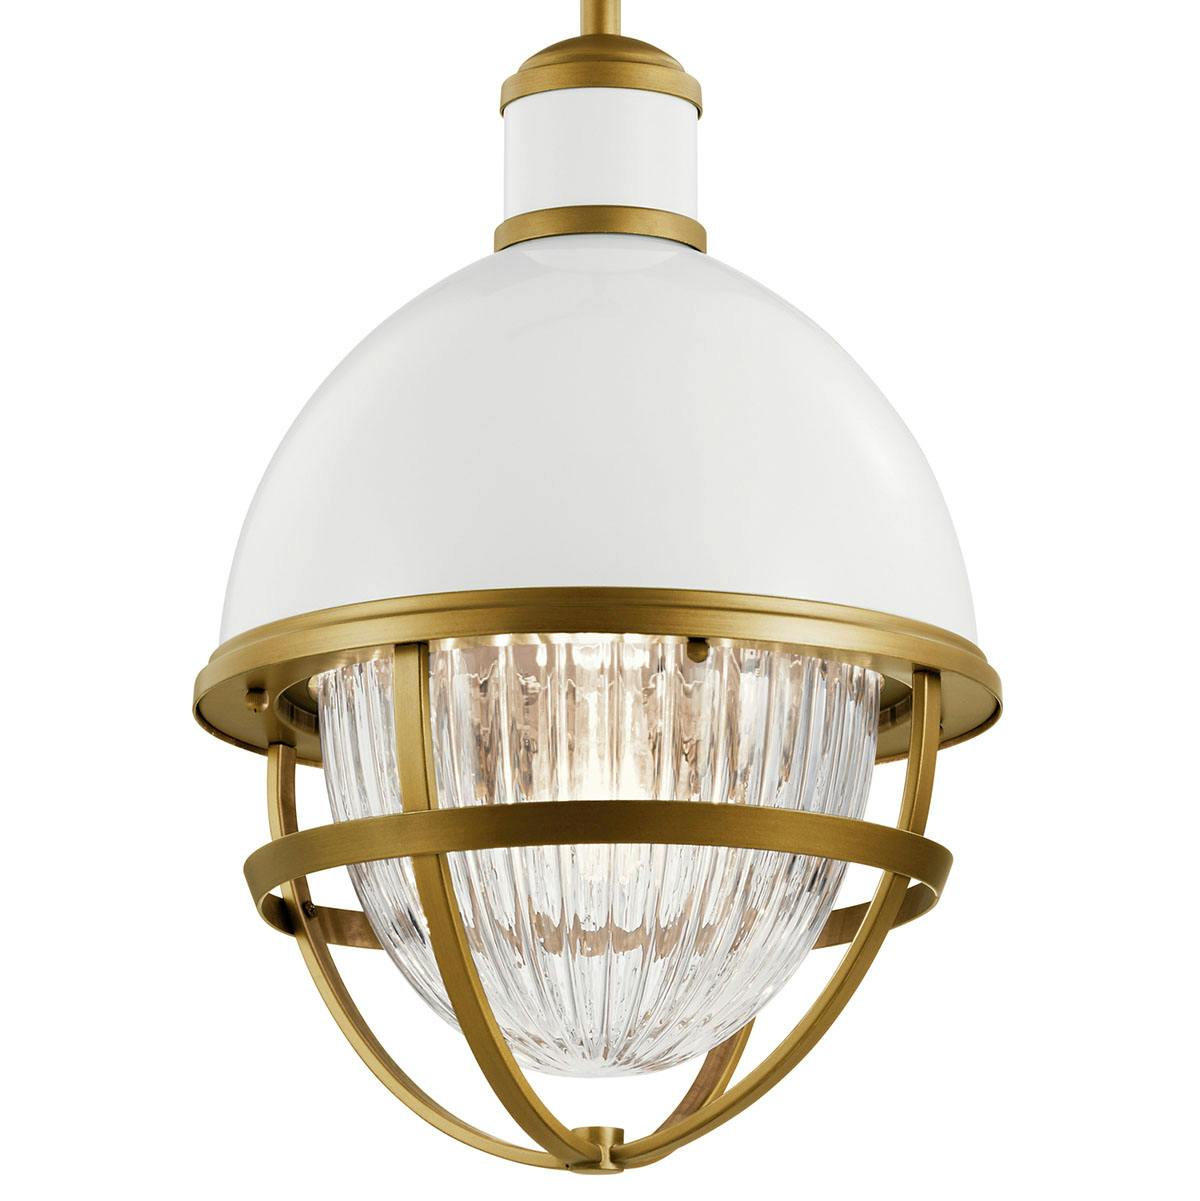 Close up view of the Tollis 18" 1 Light Pendant White & Brass on a white background